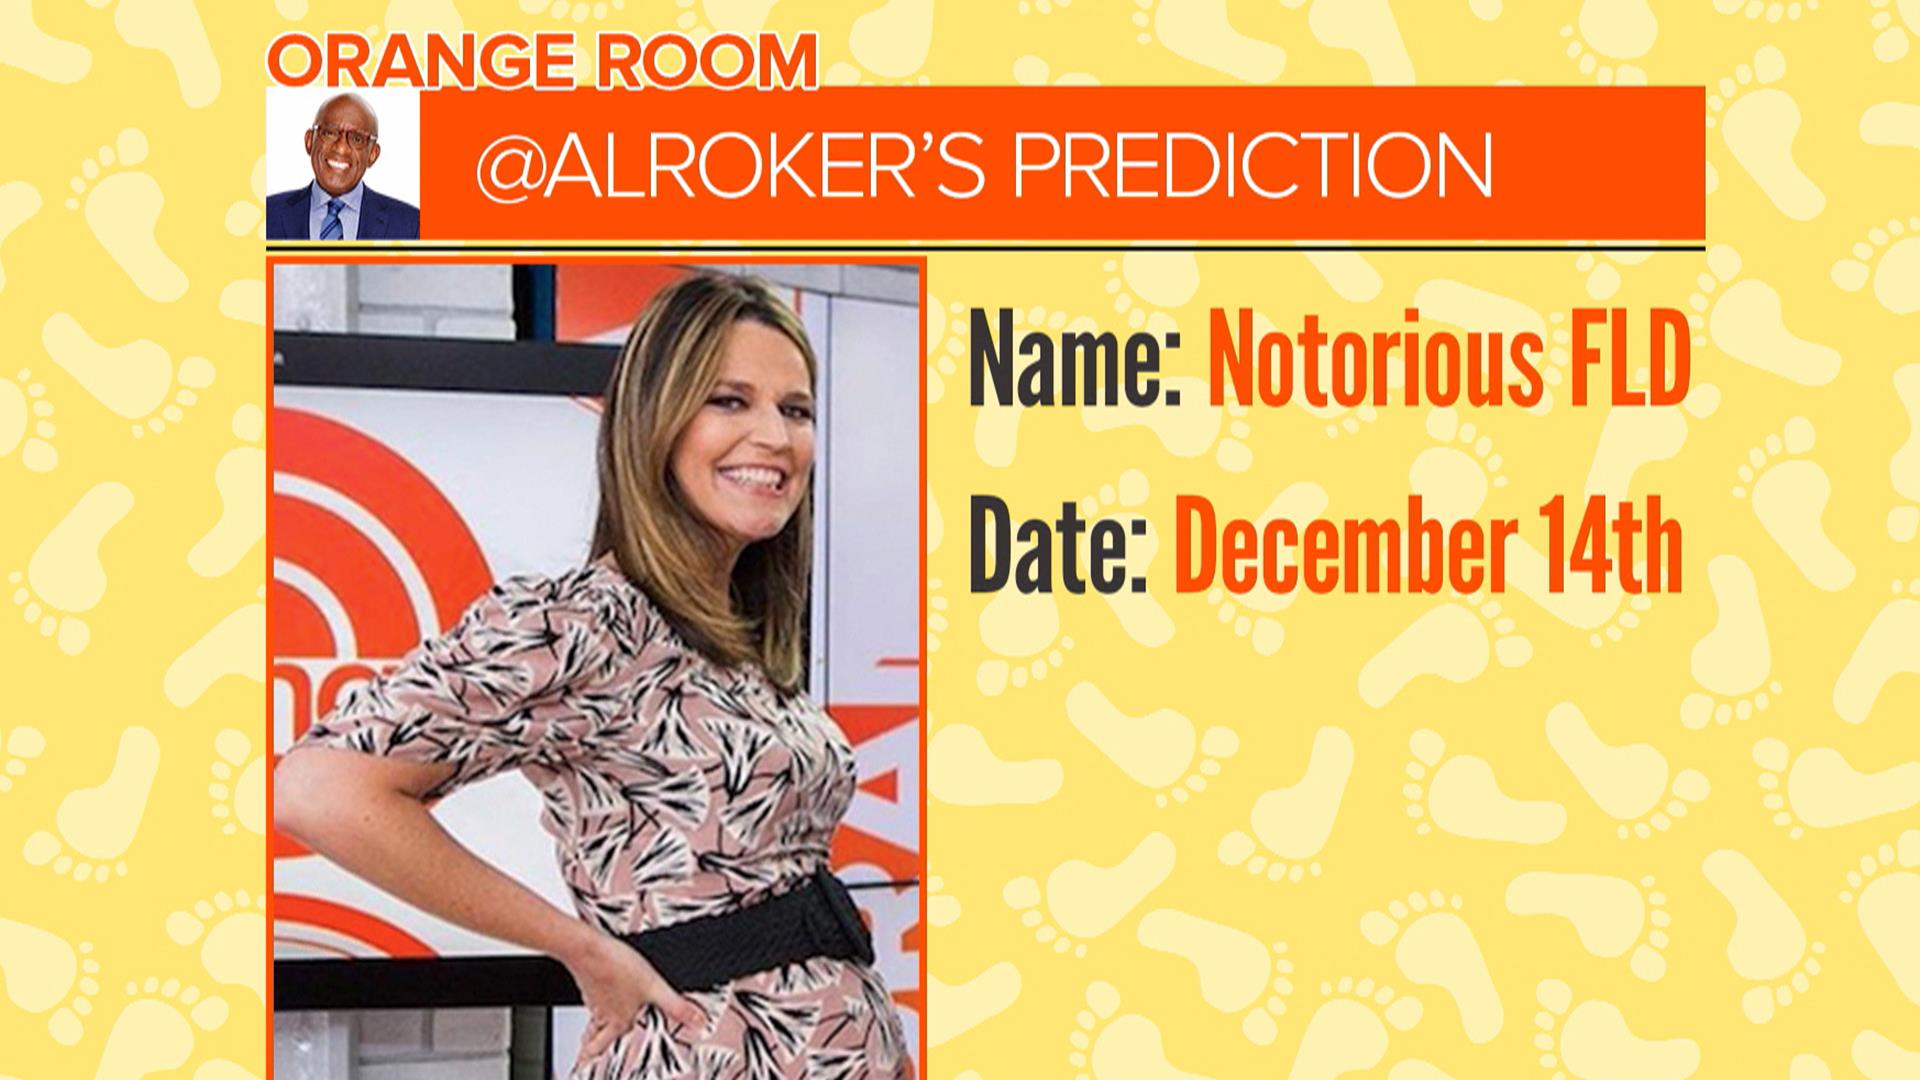 What will Savannah name her baby? Al Roker suggests 'Notorious FLD'